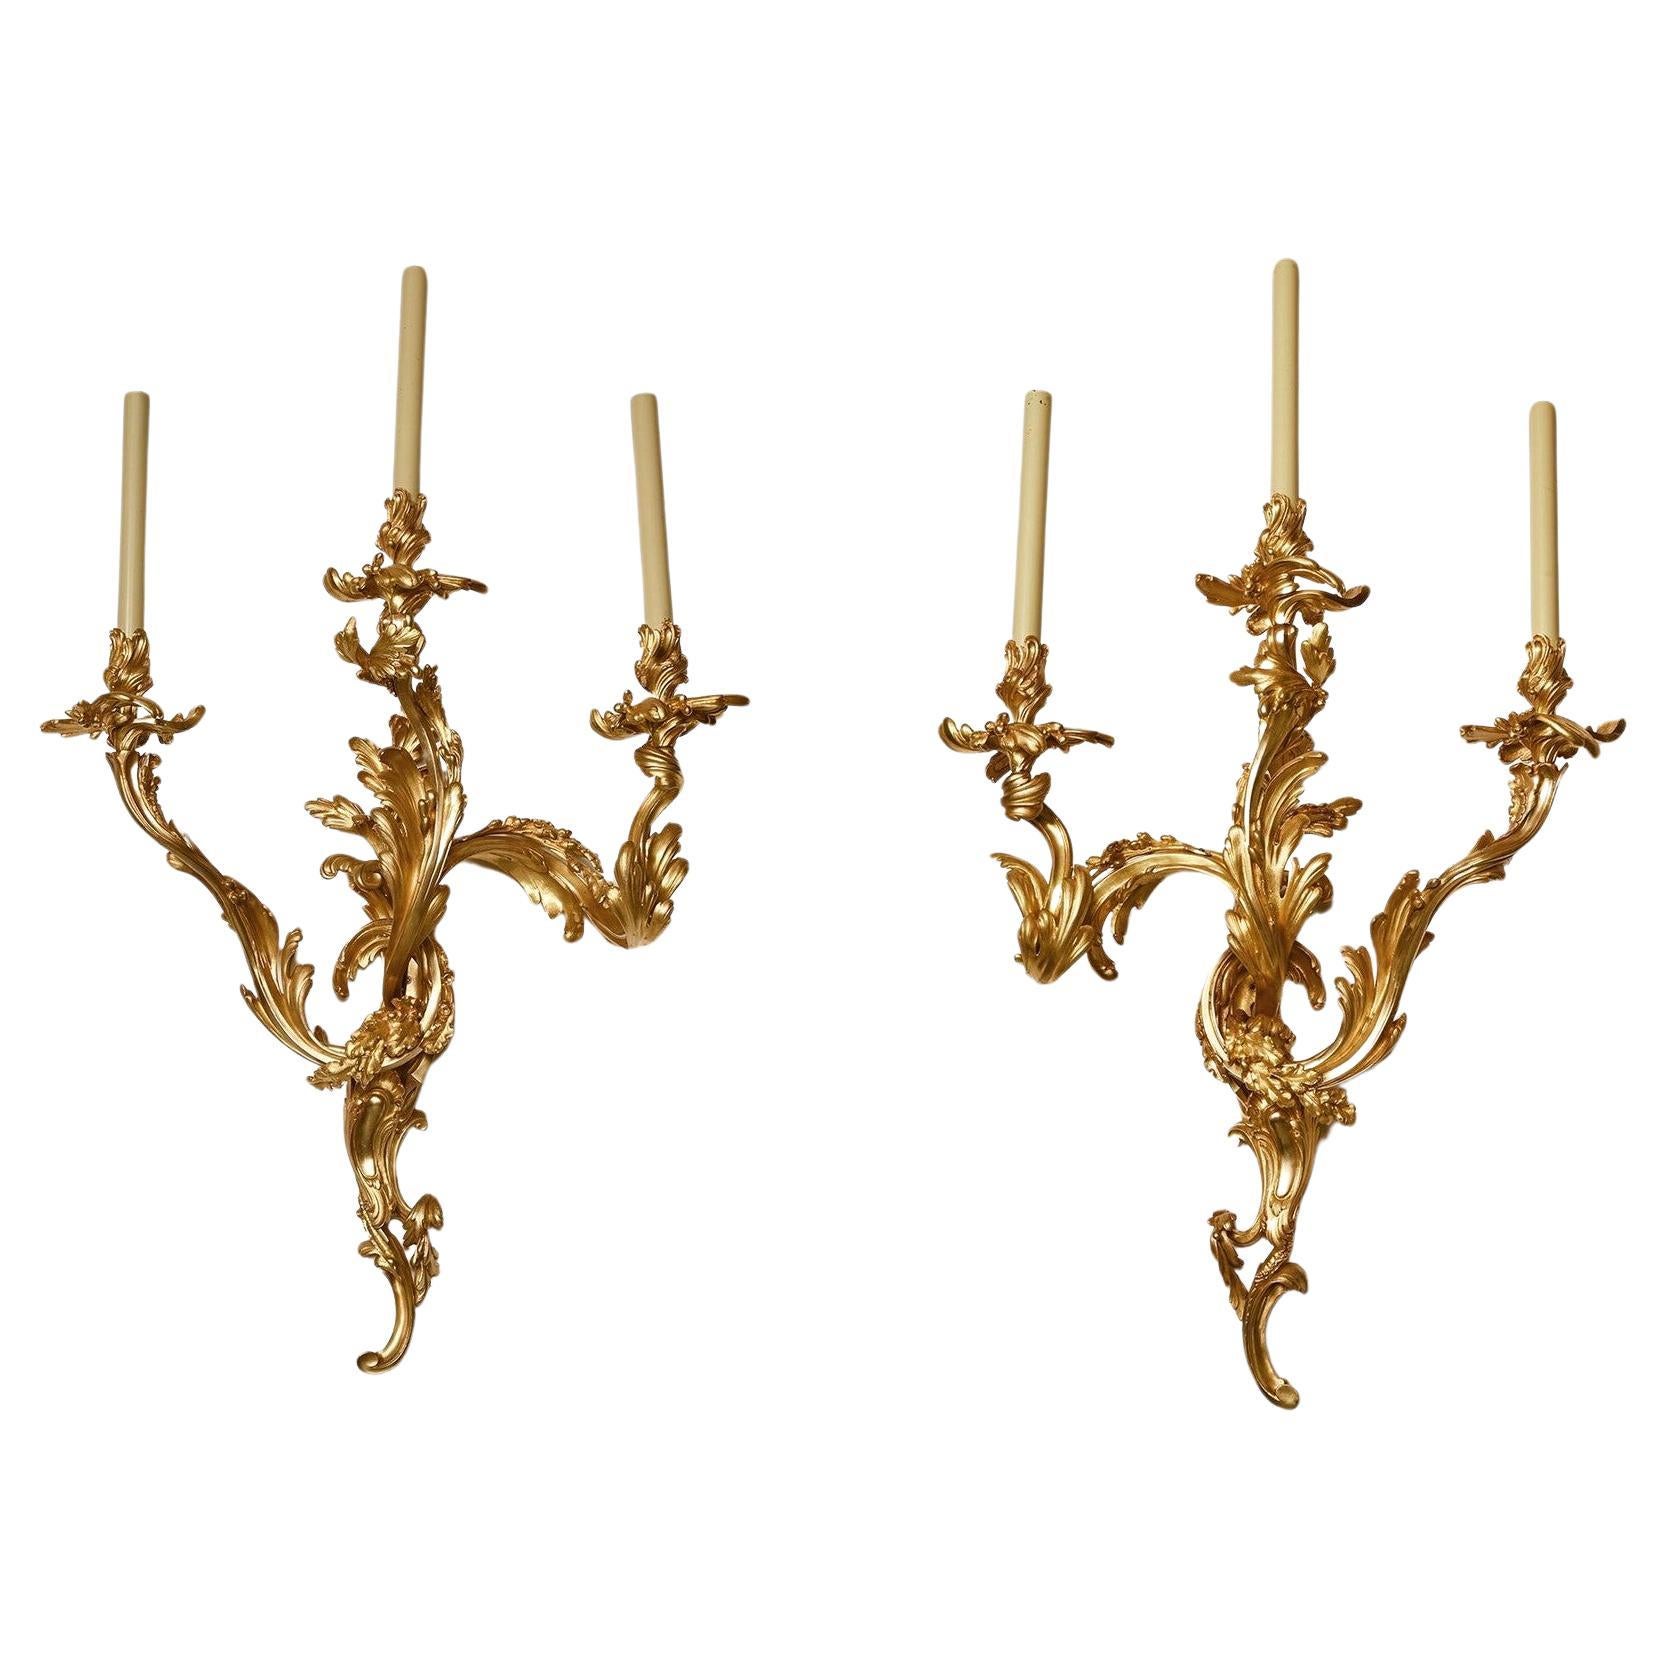 Pair of Large 19th Century French Three Branch Ormolu Wall Lights or Appliqués For Sale